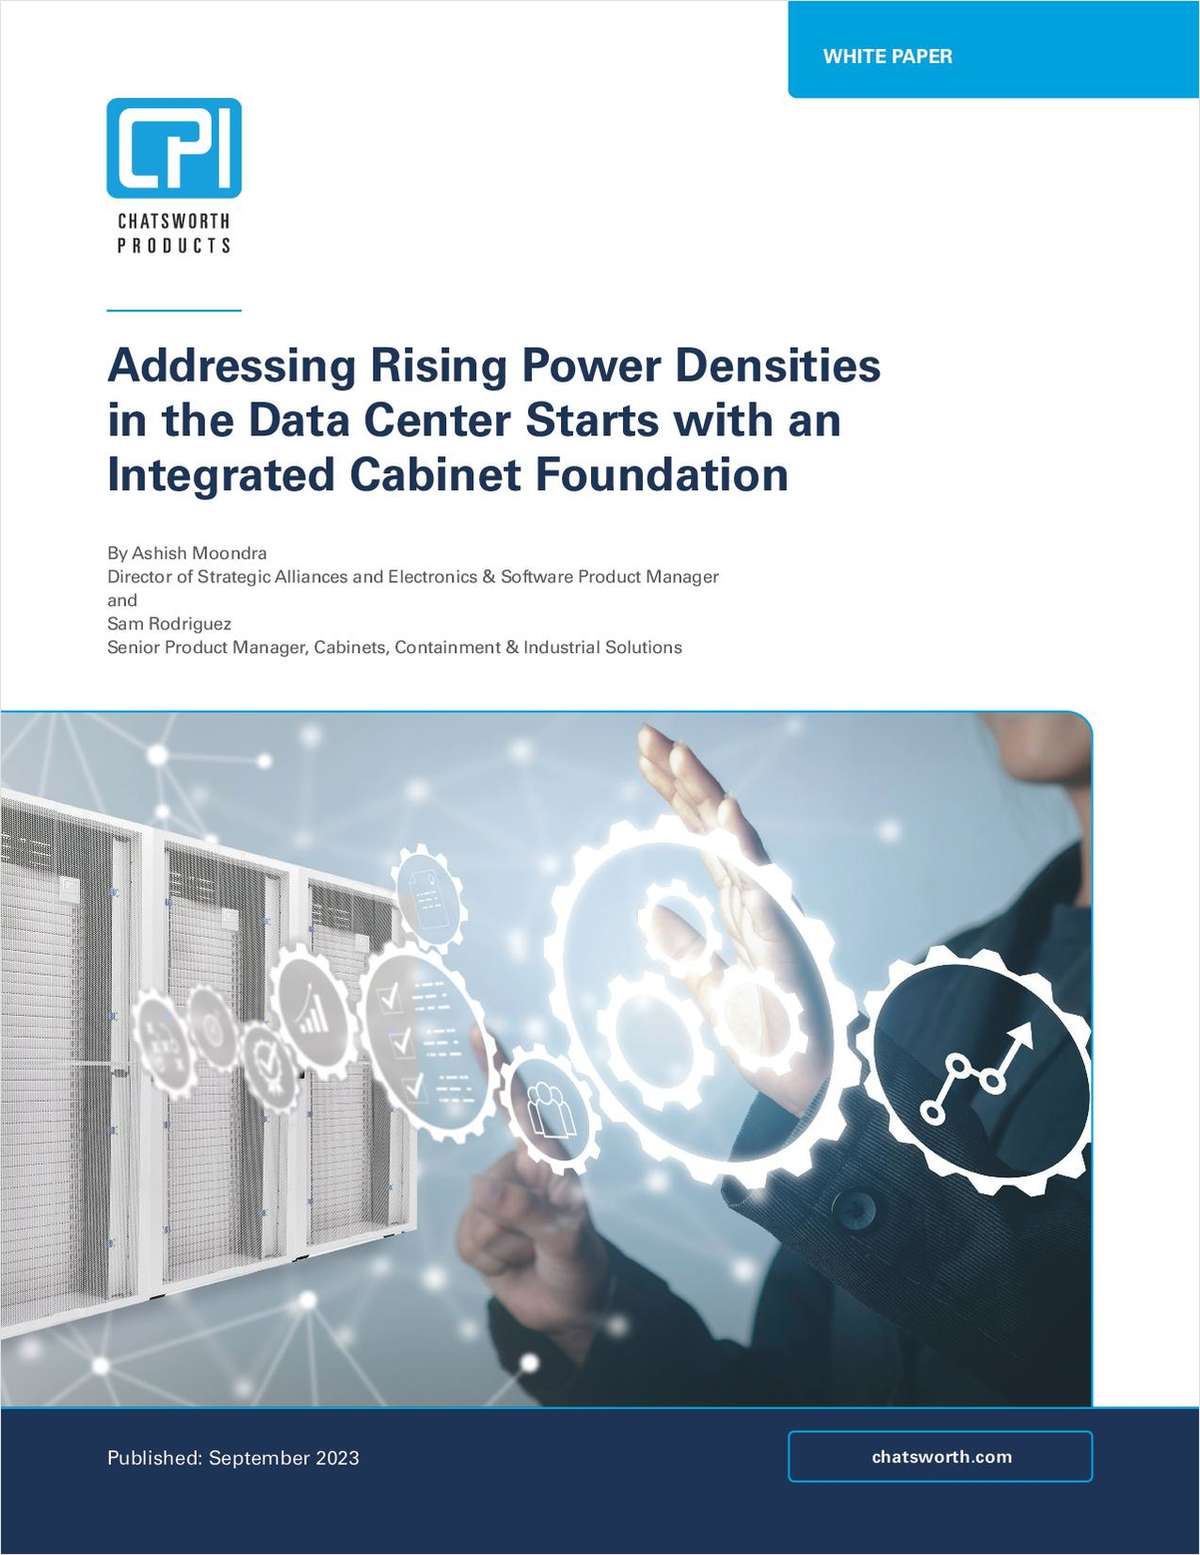 Addressing Rising Power Densities in the Data Center Starts with an Integrated Cabinet Foundation